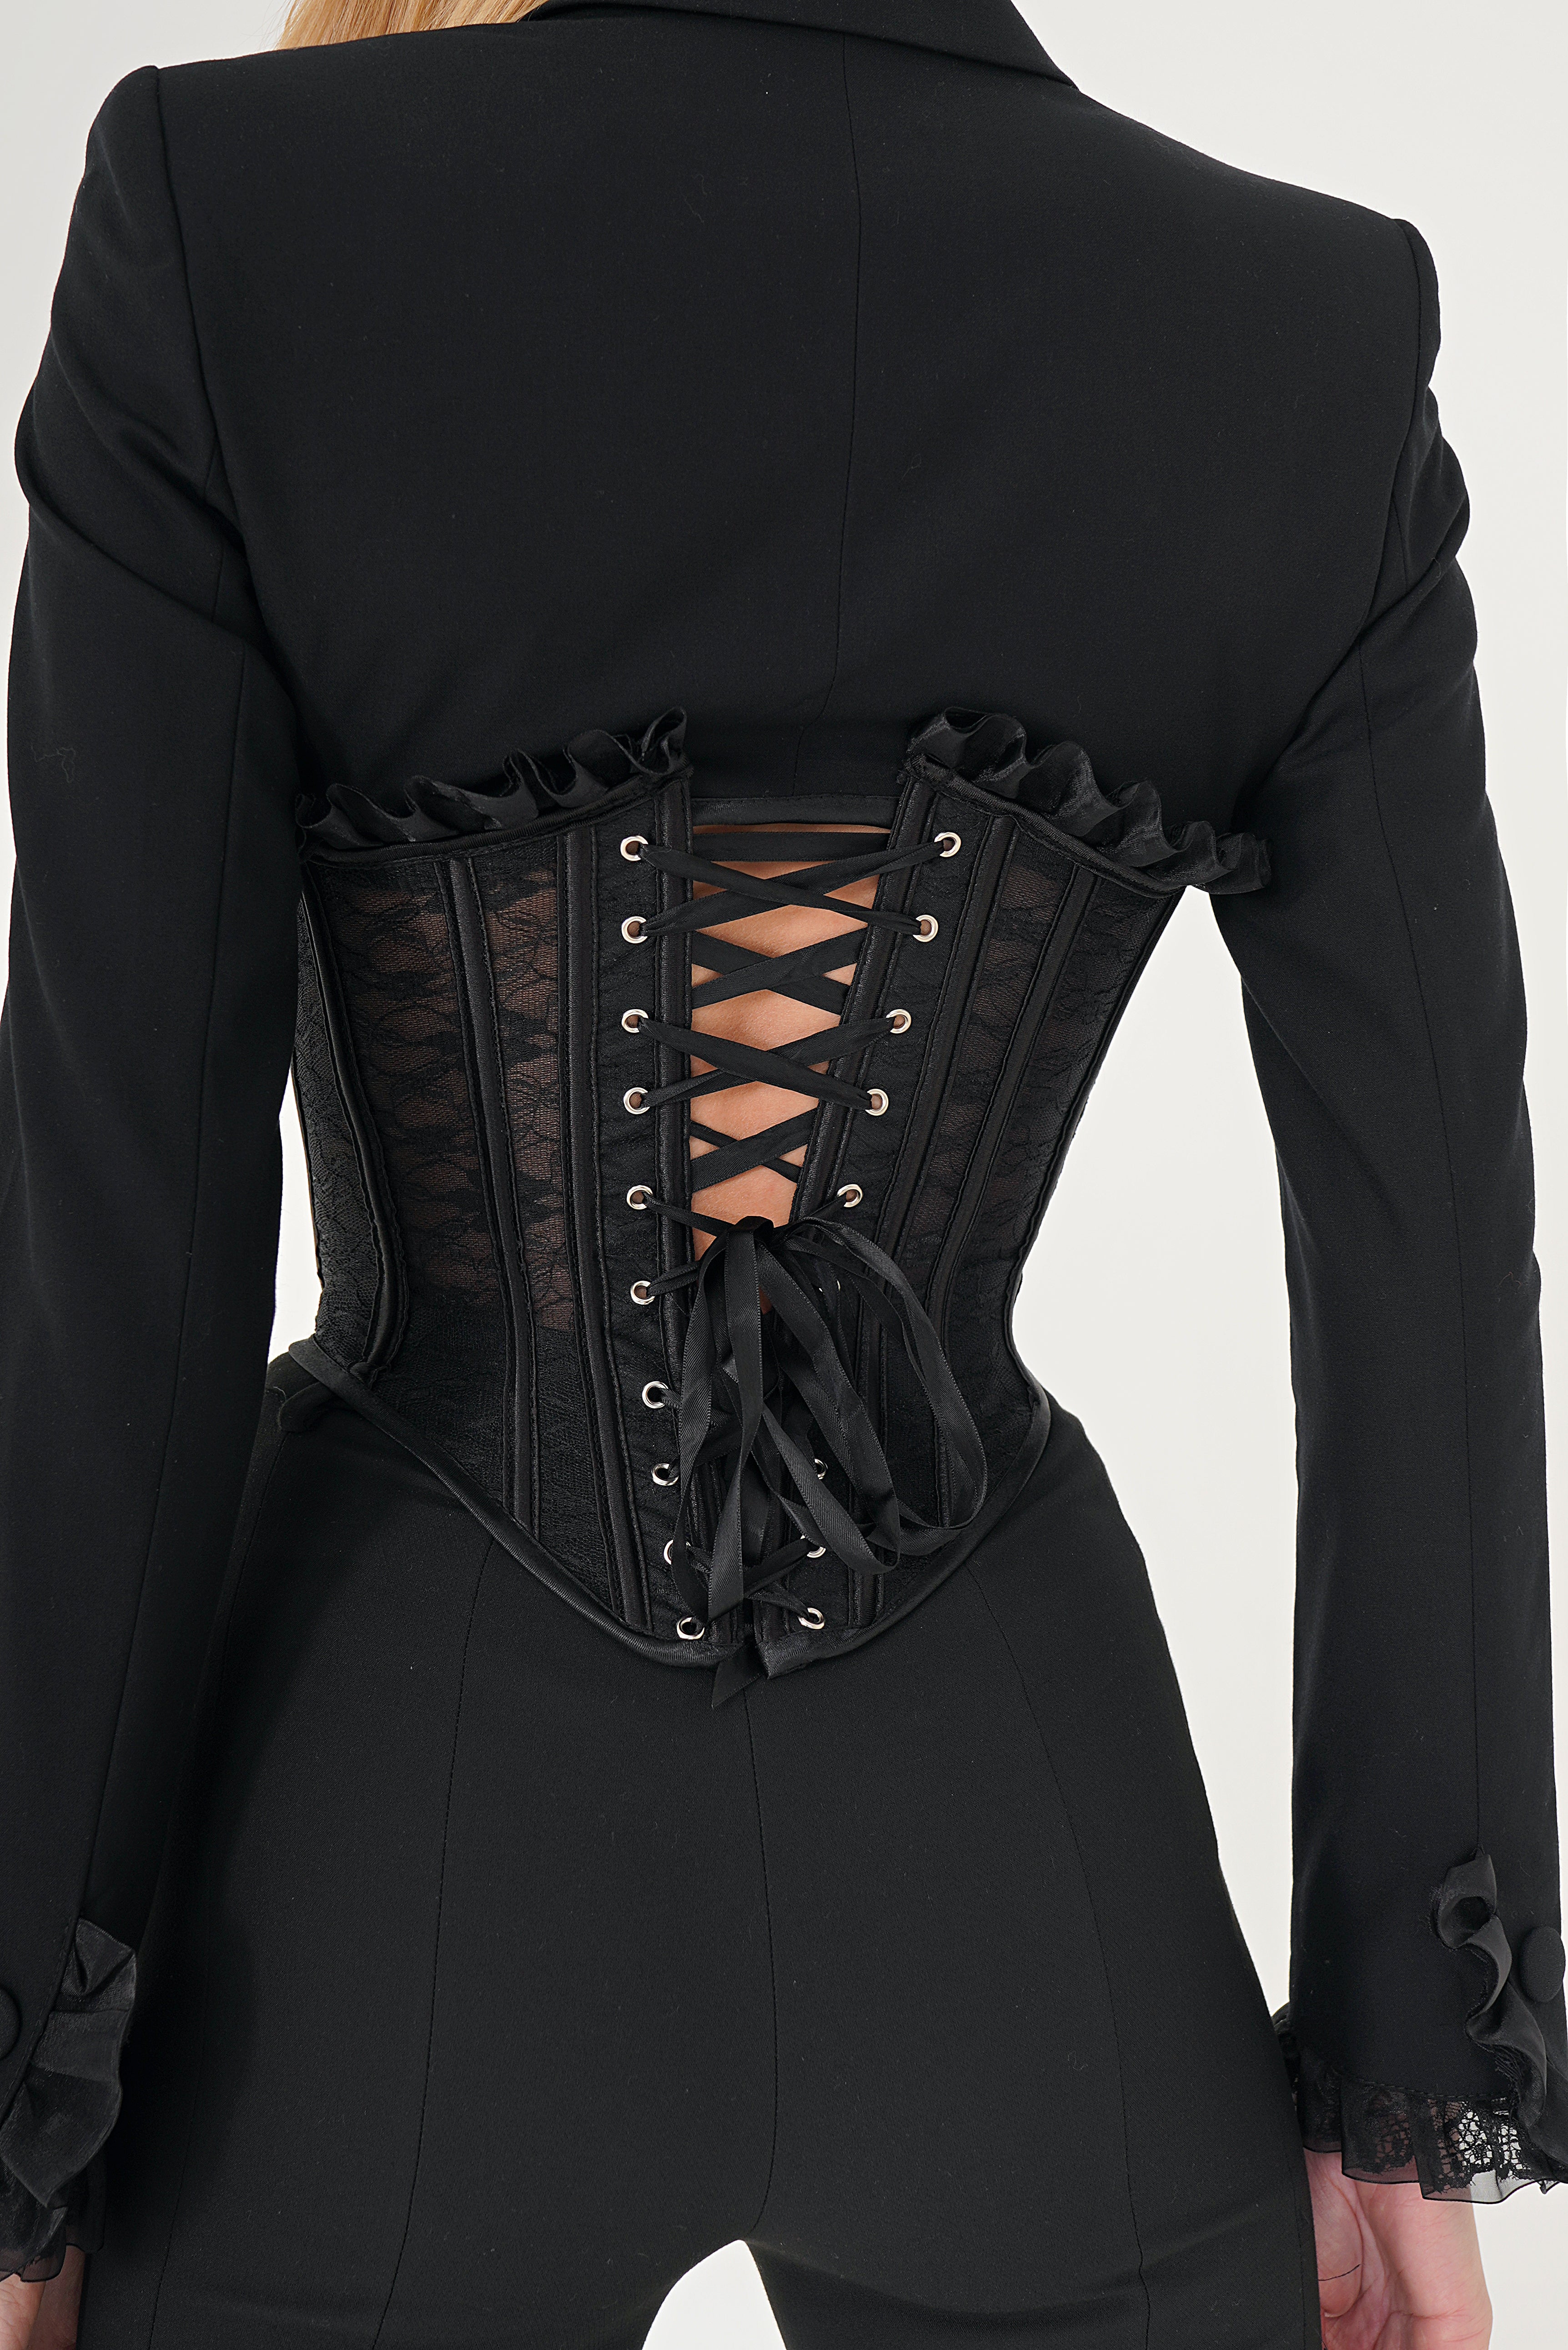 A Lace-Up Corset Over A Blazer  9 Seriously Easy Outfits For